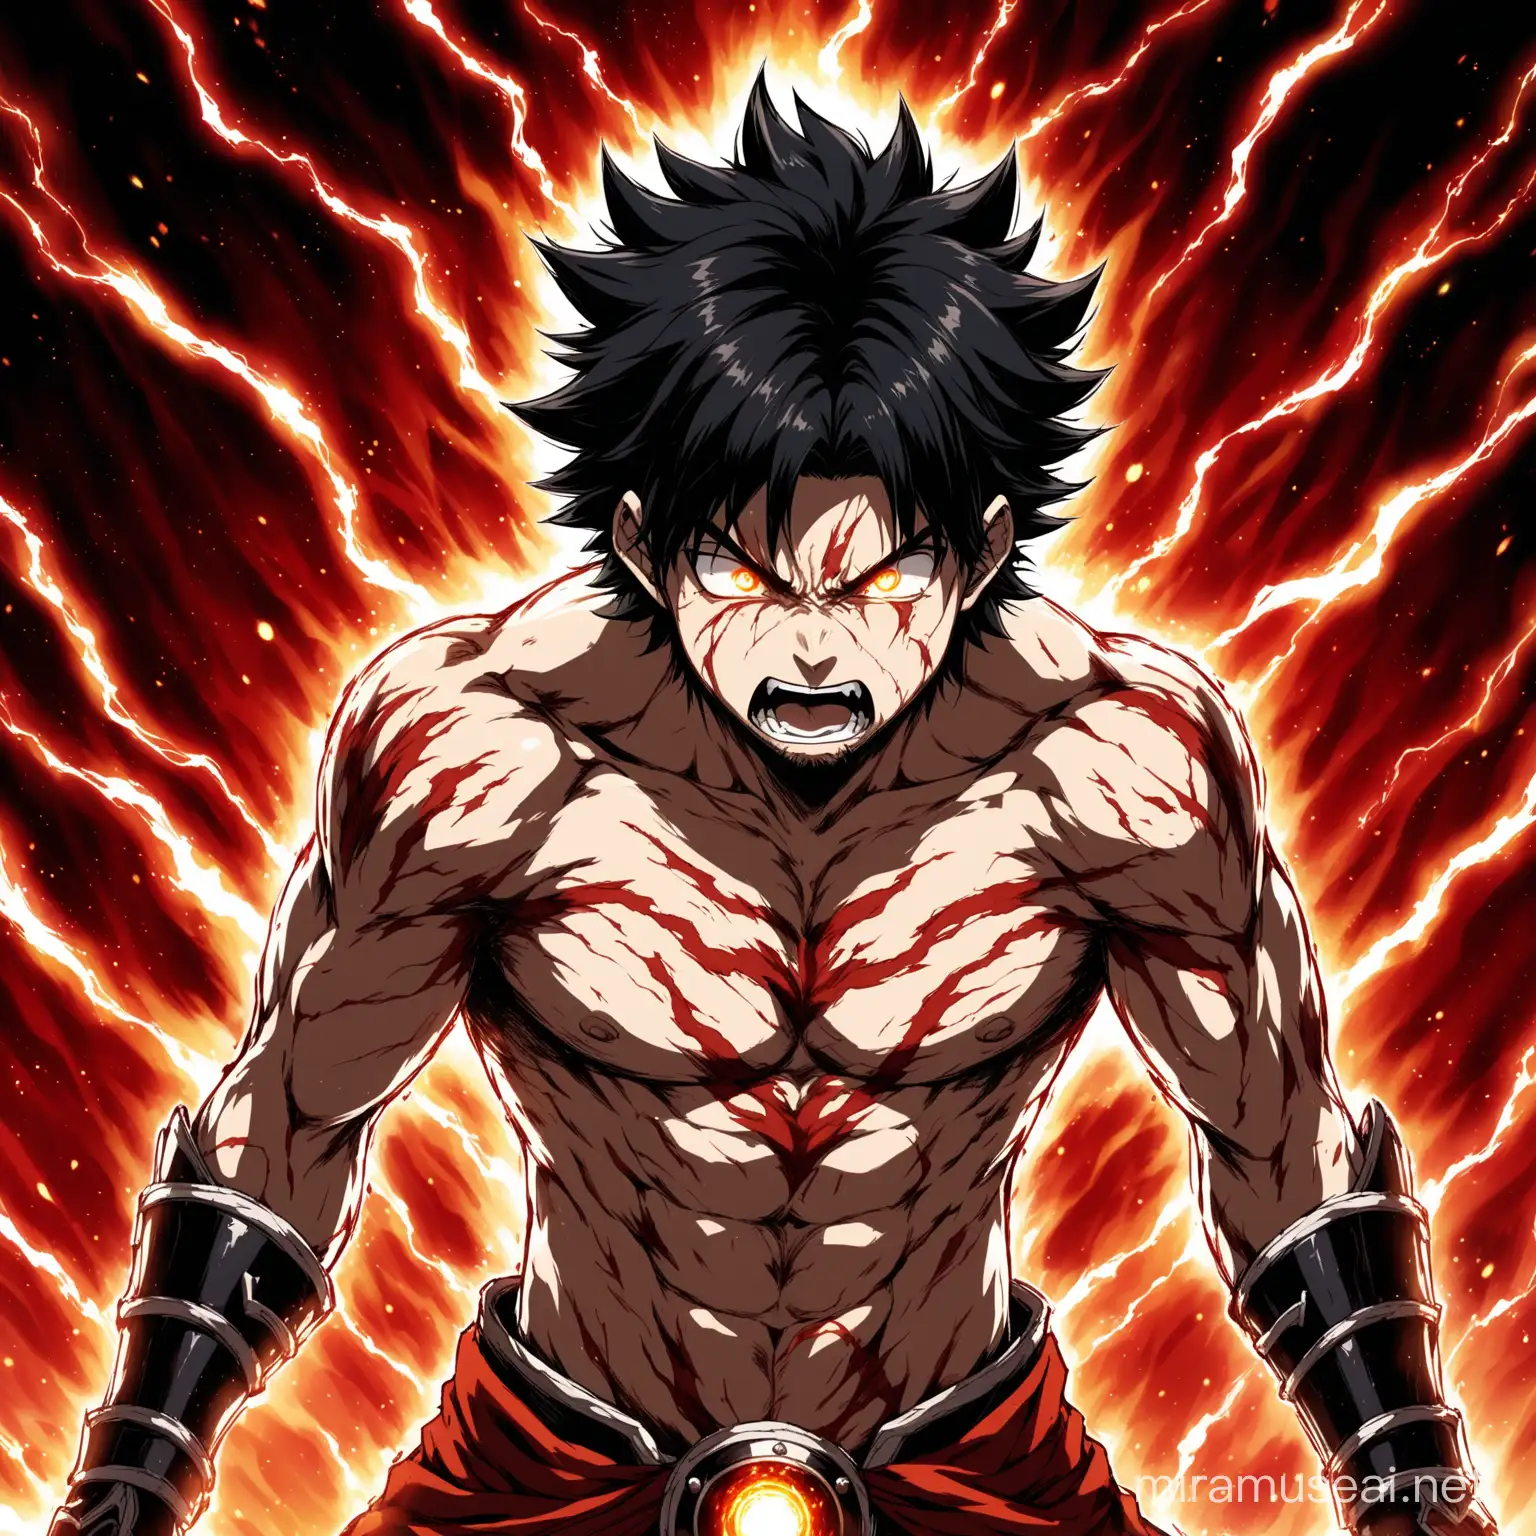 Fantasy Anime Hero with Scarred Physique and Intense Aura